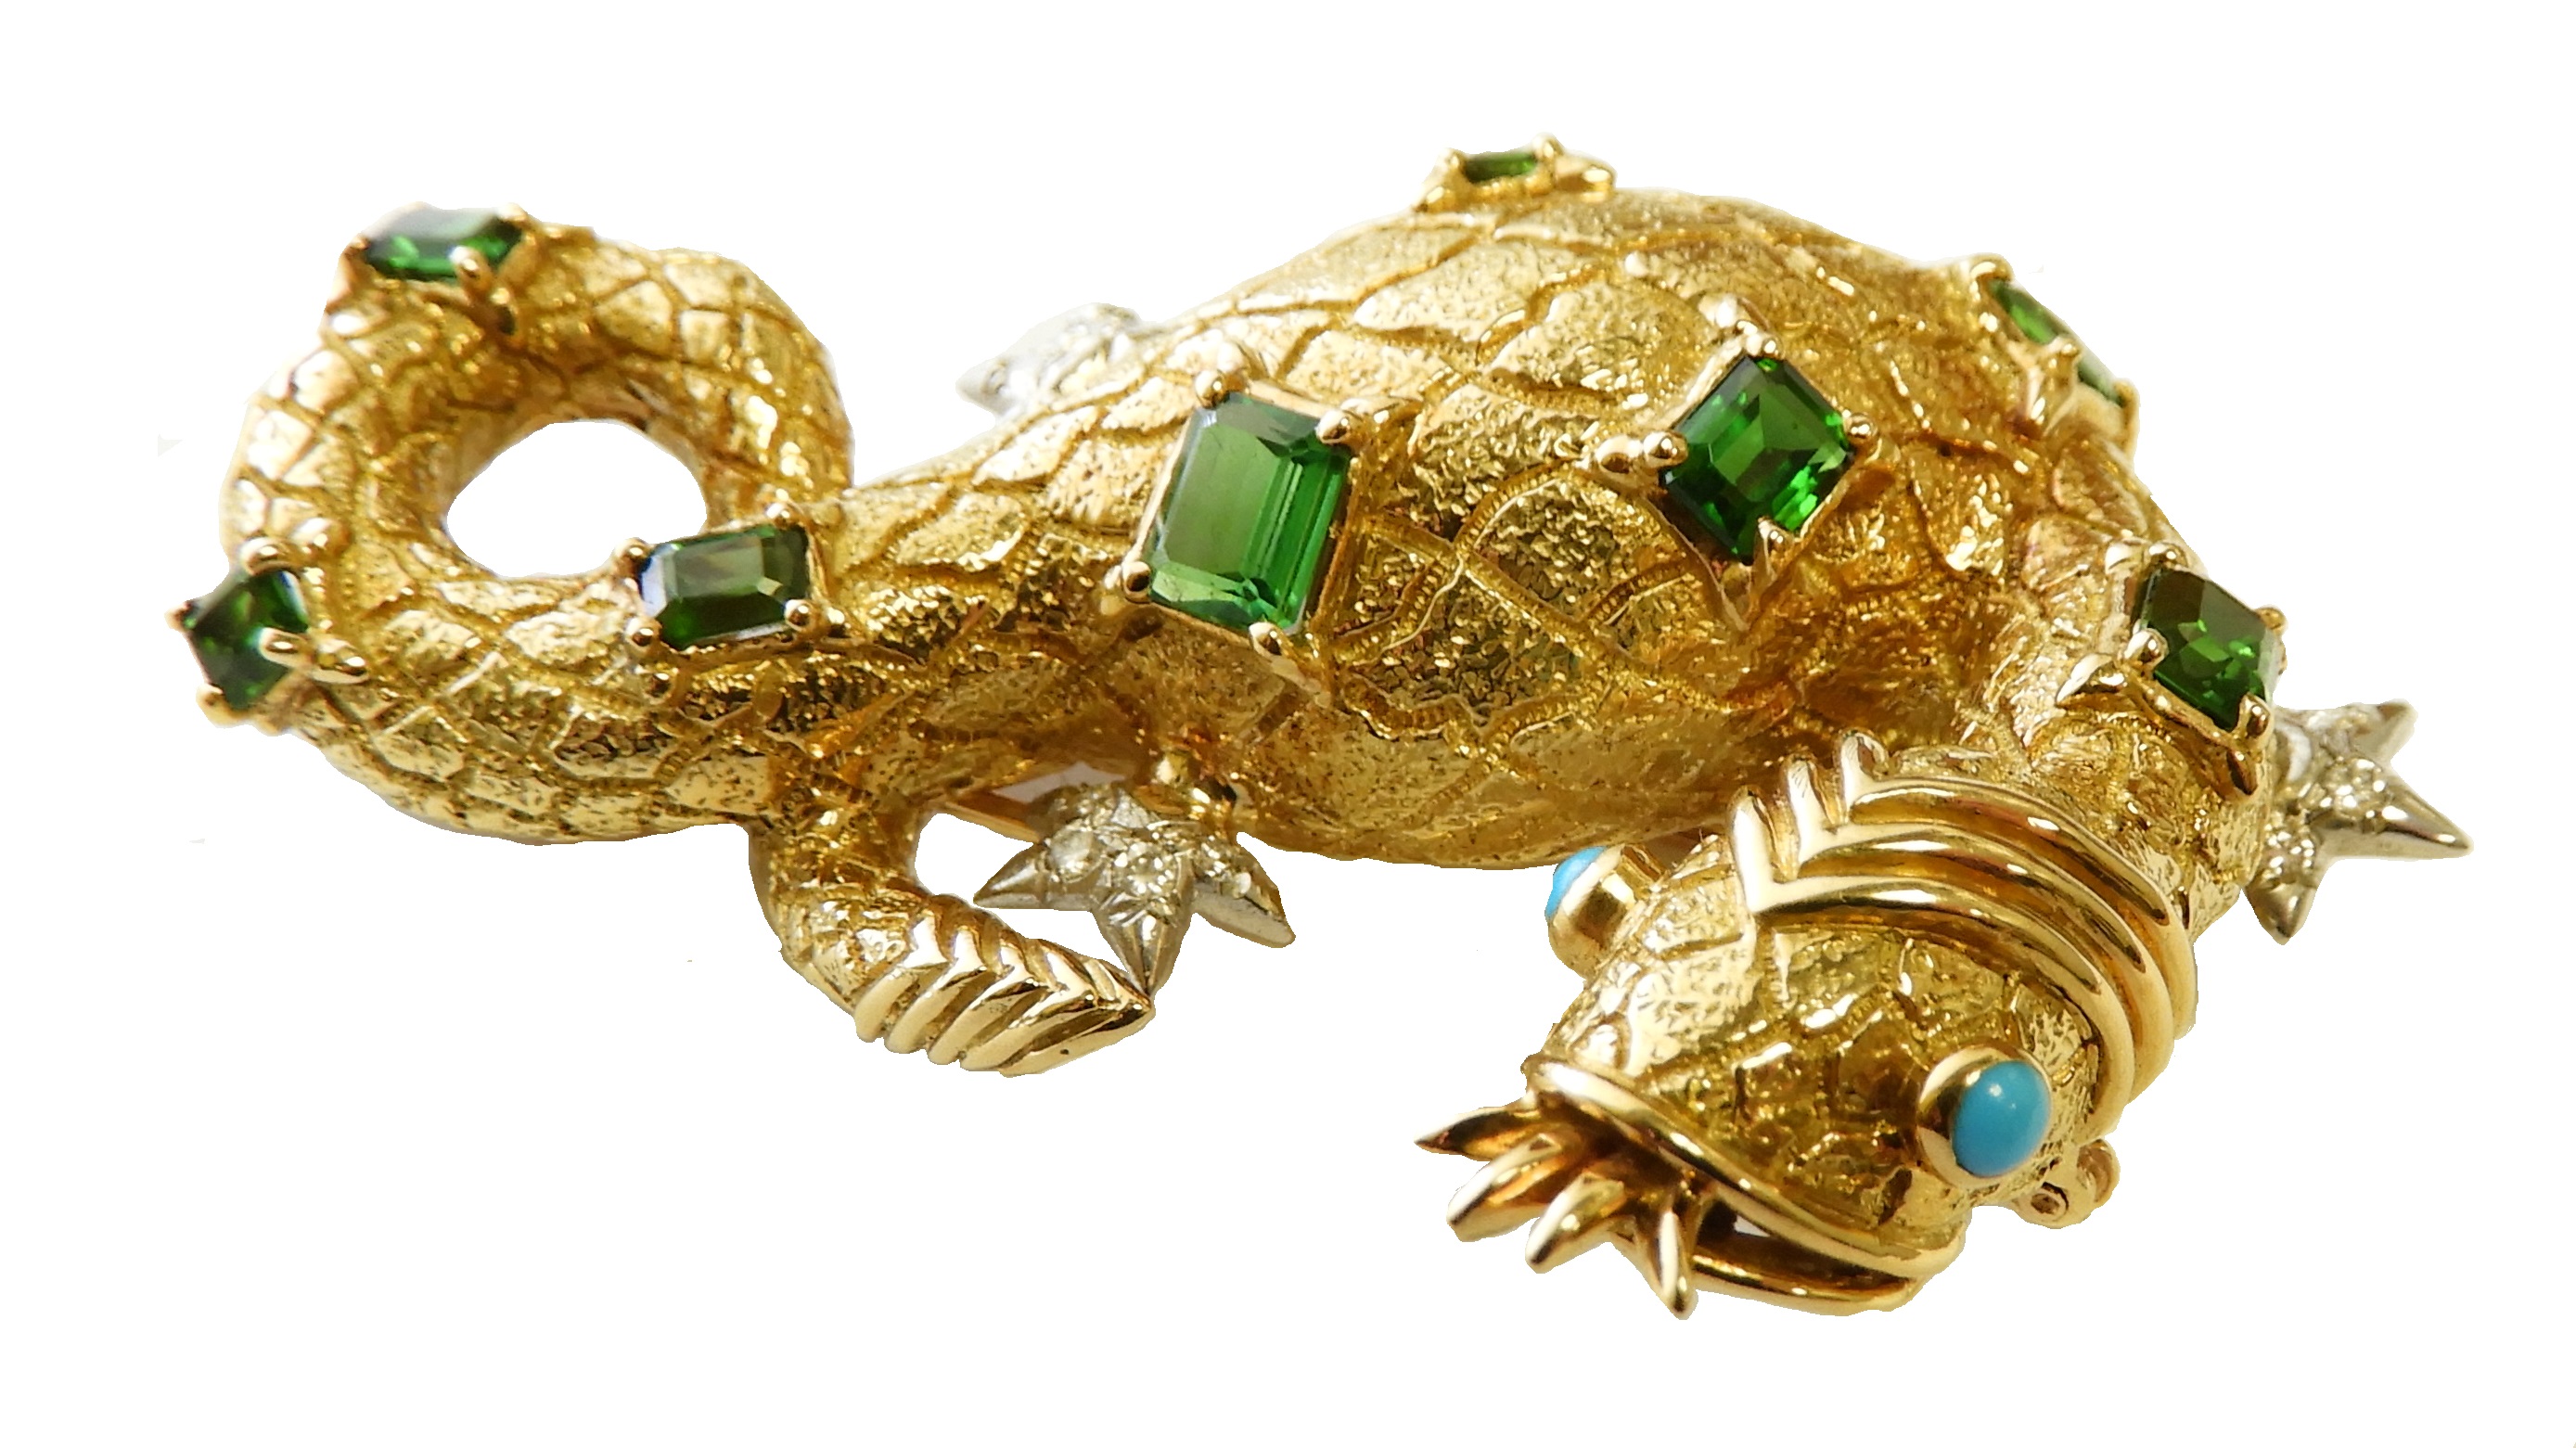 9. Lot 3. 18K Gold And Jeweled Schlumberger For Tiffany & Co. Salamander Brooch. Sold For $6,825 ($4,000-6,000)